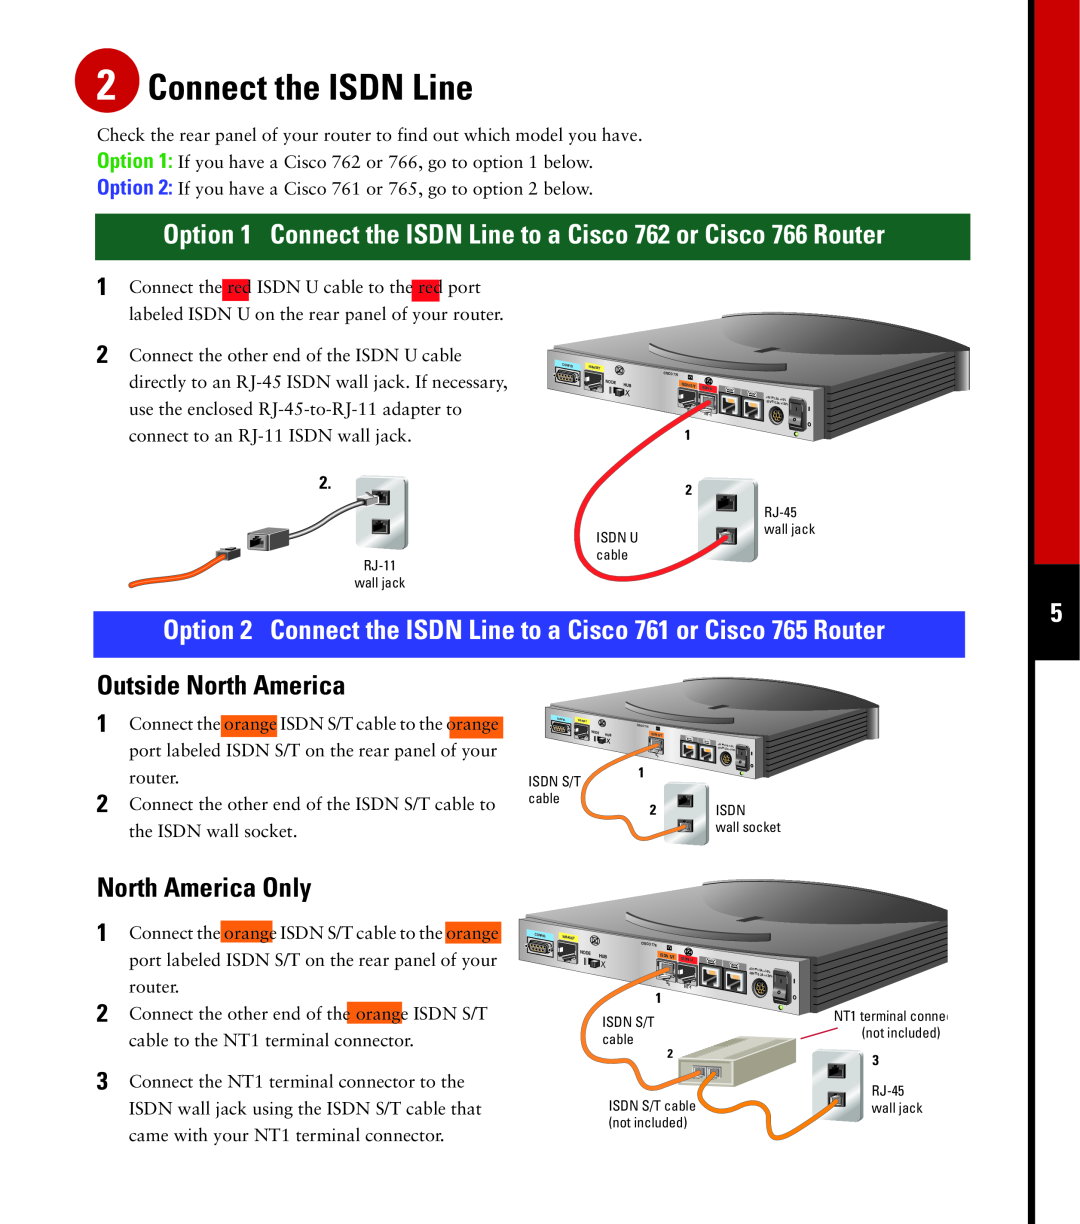 Cisco Systems 760 quick start Option 1 Connect the ISDN Line to a Cisco 762 or Cisco 766 Router, North America Only 